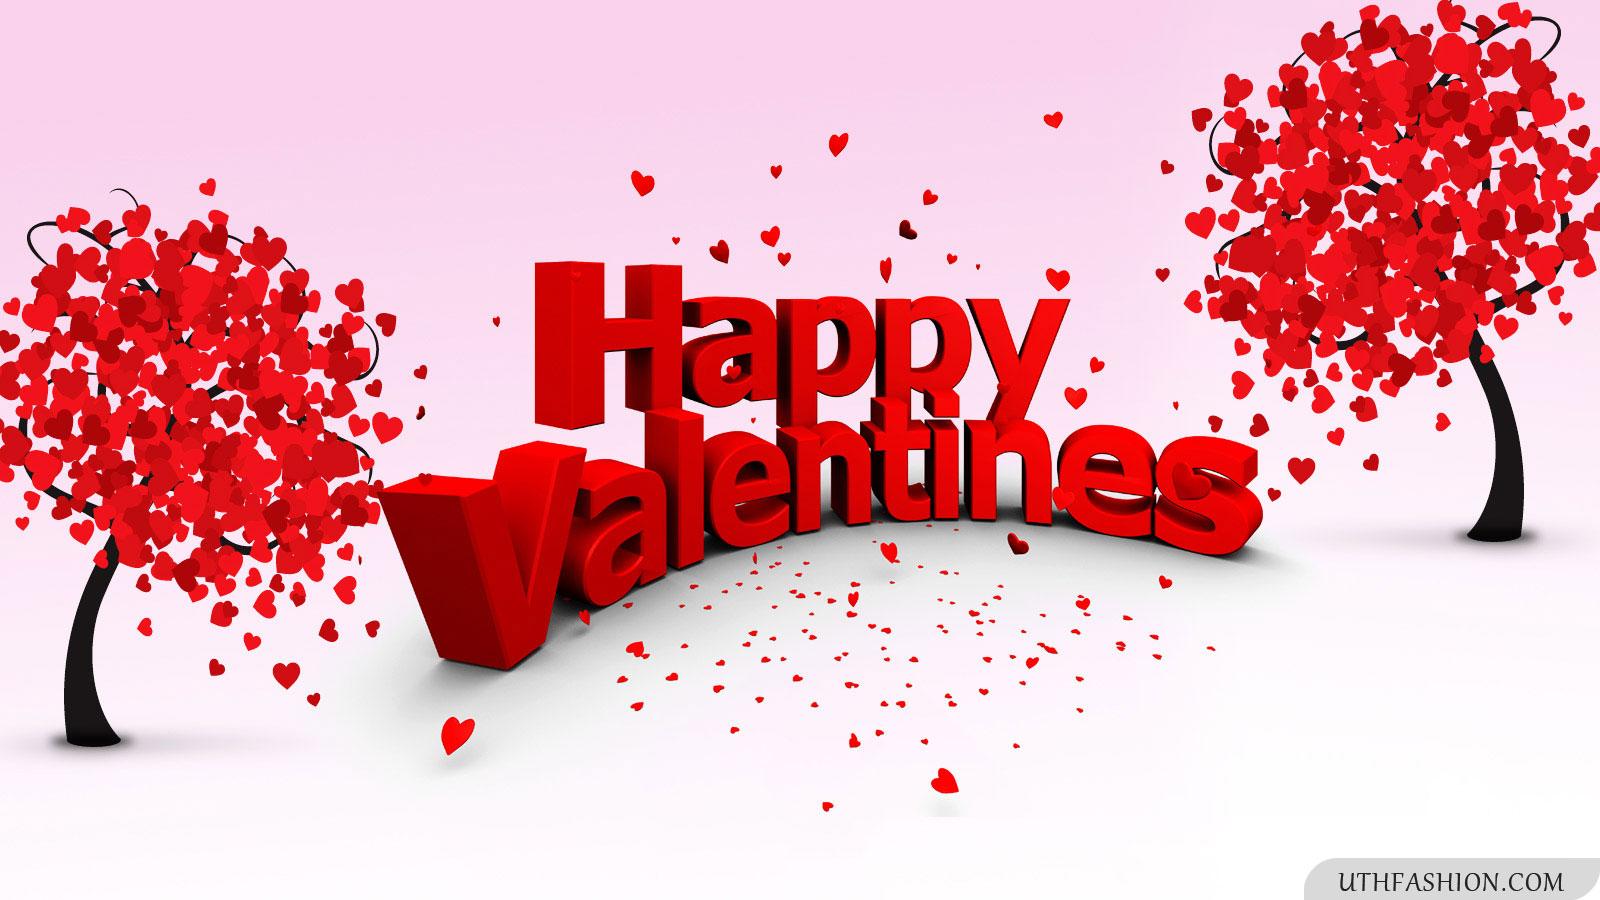 Free download Happy Valentines Day Image And Love